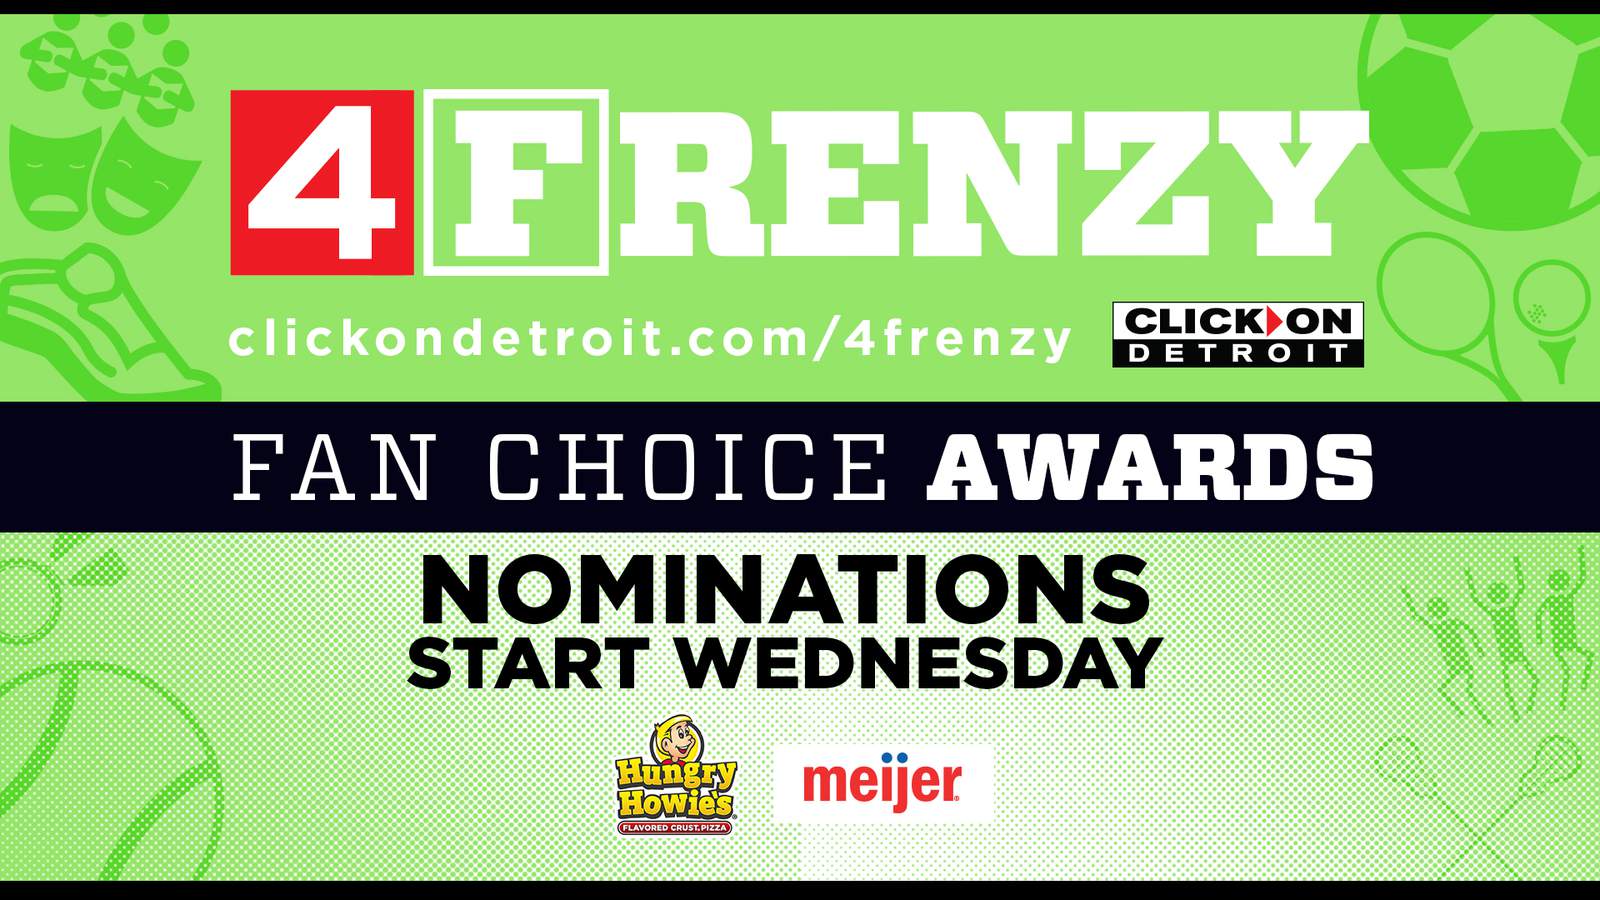 Nominations open tomorrow in 4Frenzy Spring 2021